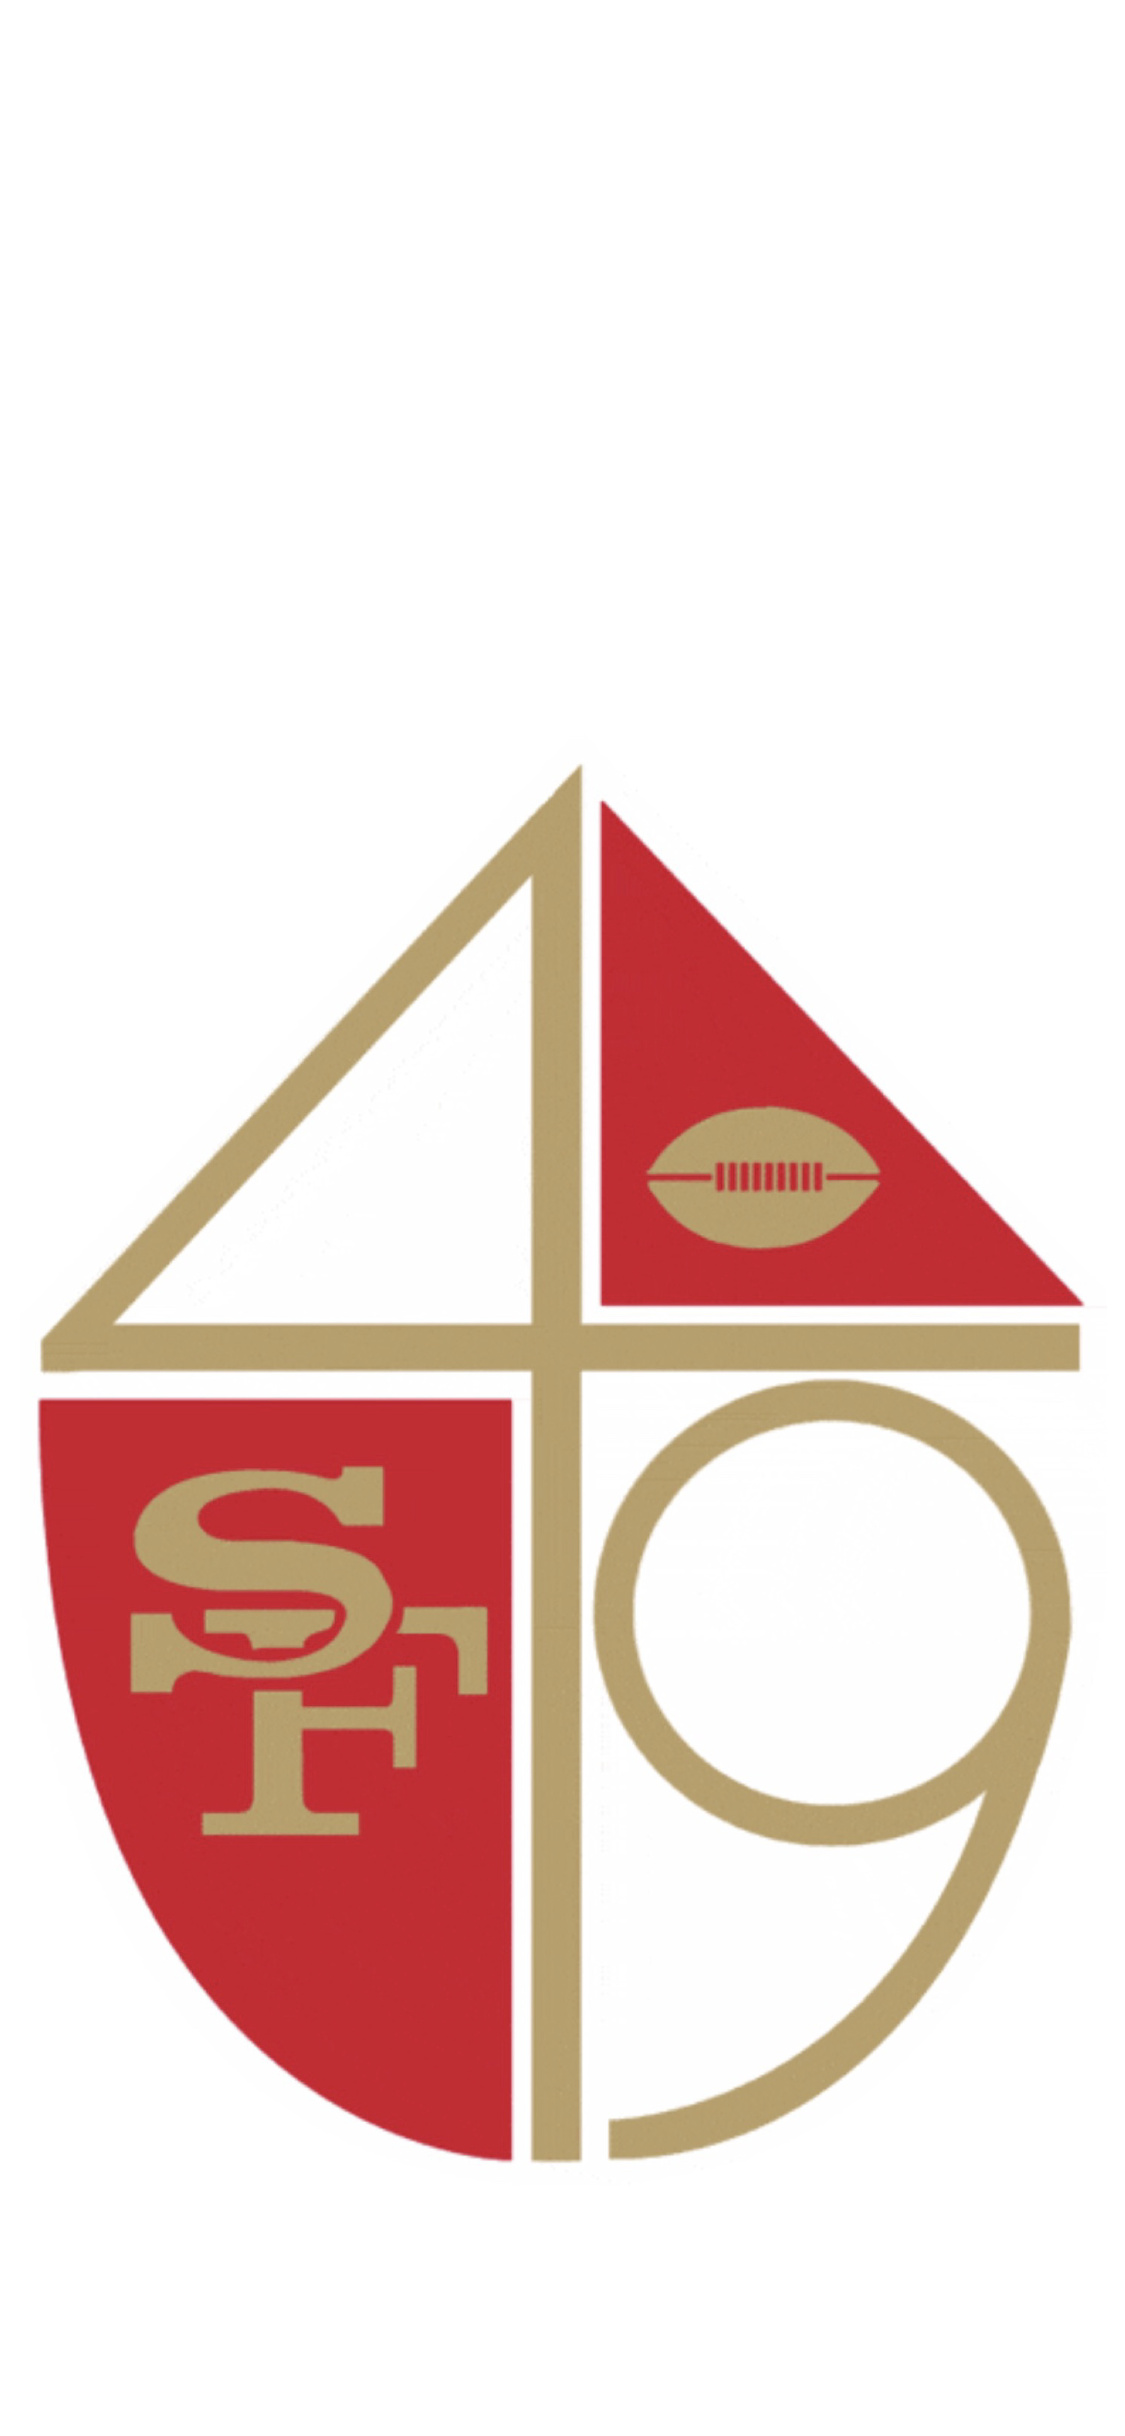 49ers logo, Striking wallpapers, Cell phone backgrounds, R49ers community, 1130x2440 HD Handy